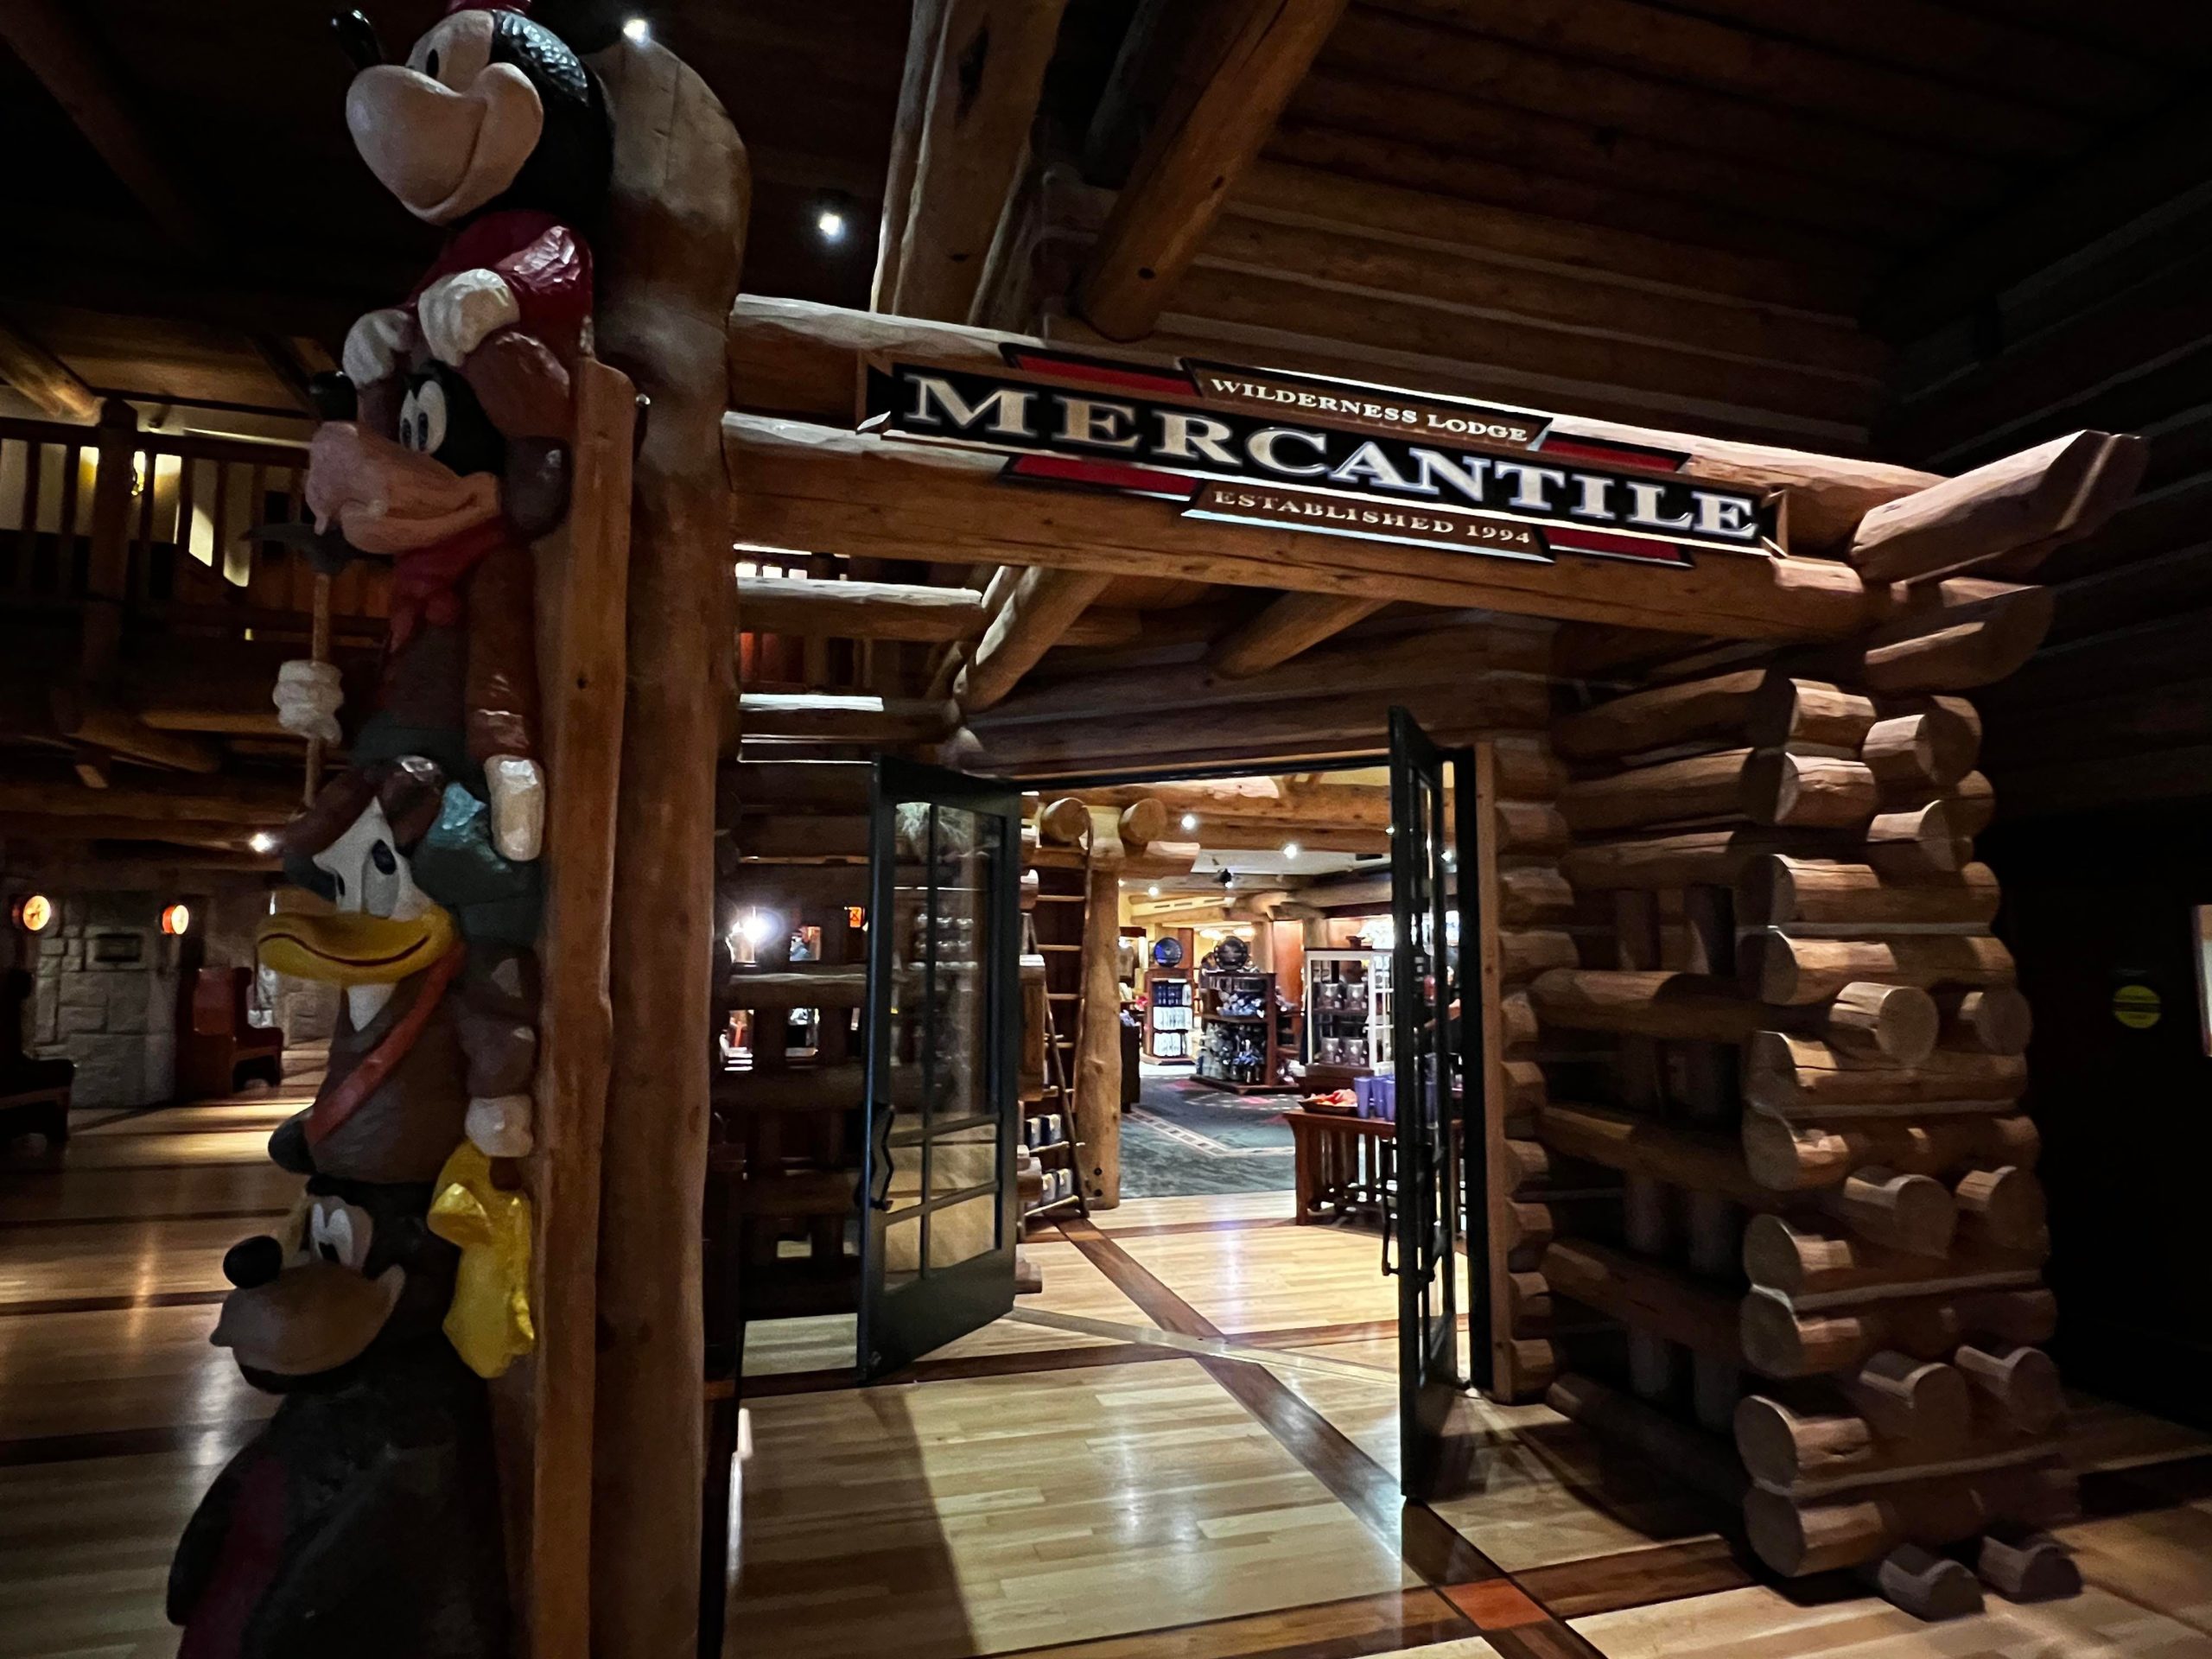 https://mickeyblog.com/wp-content/uploads/2022/10/Wilderness-Lodge-Mercantile-store-entrance-scaled.jpg